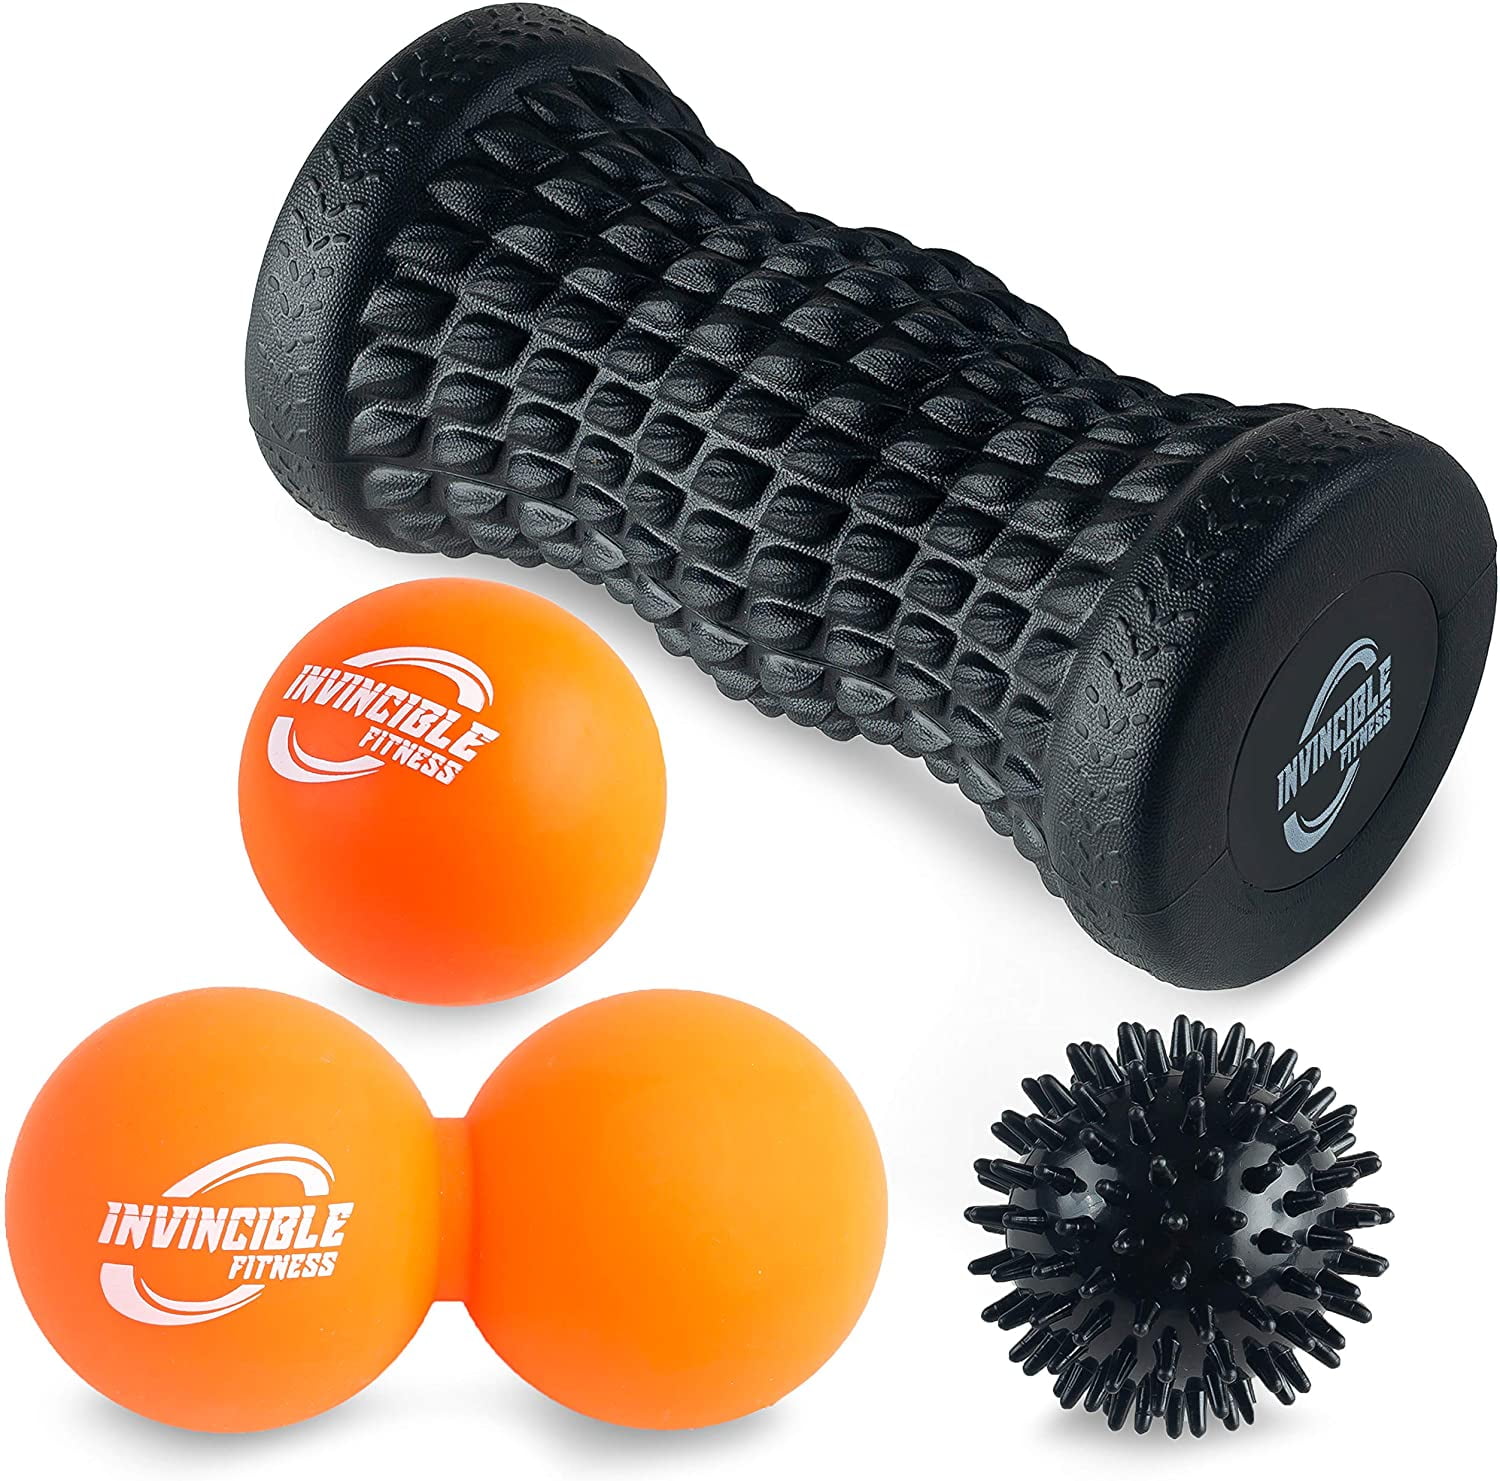 Invincible Fitness Foam Roller Set Myofascial Release Double Peanut Massage Ball Includes Muscle Roller Stick Trigger Point Ball and 3 Resistance Loop Bands for Self Deep Tissue Massage 